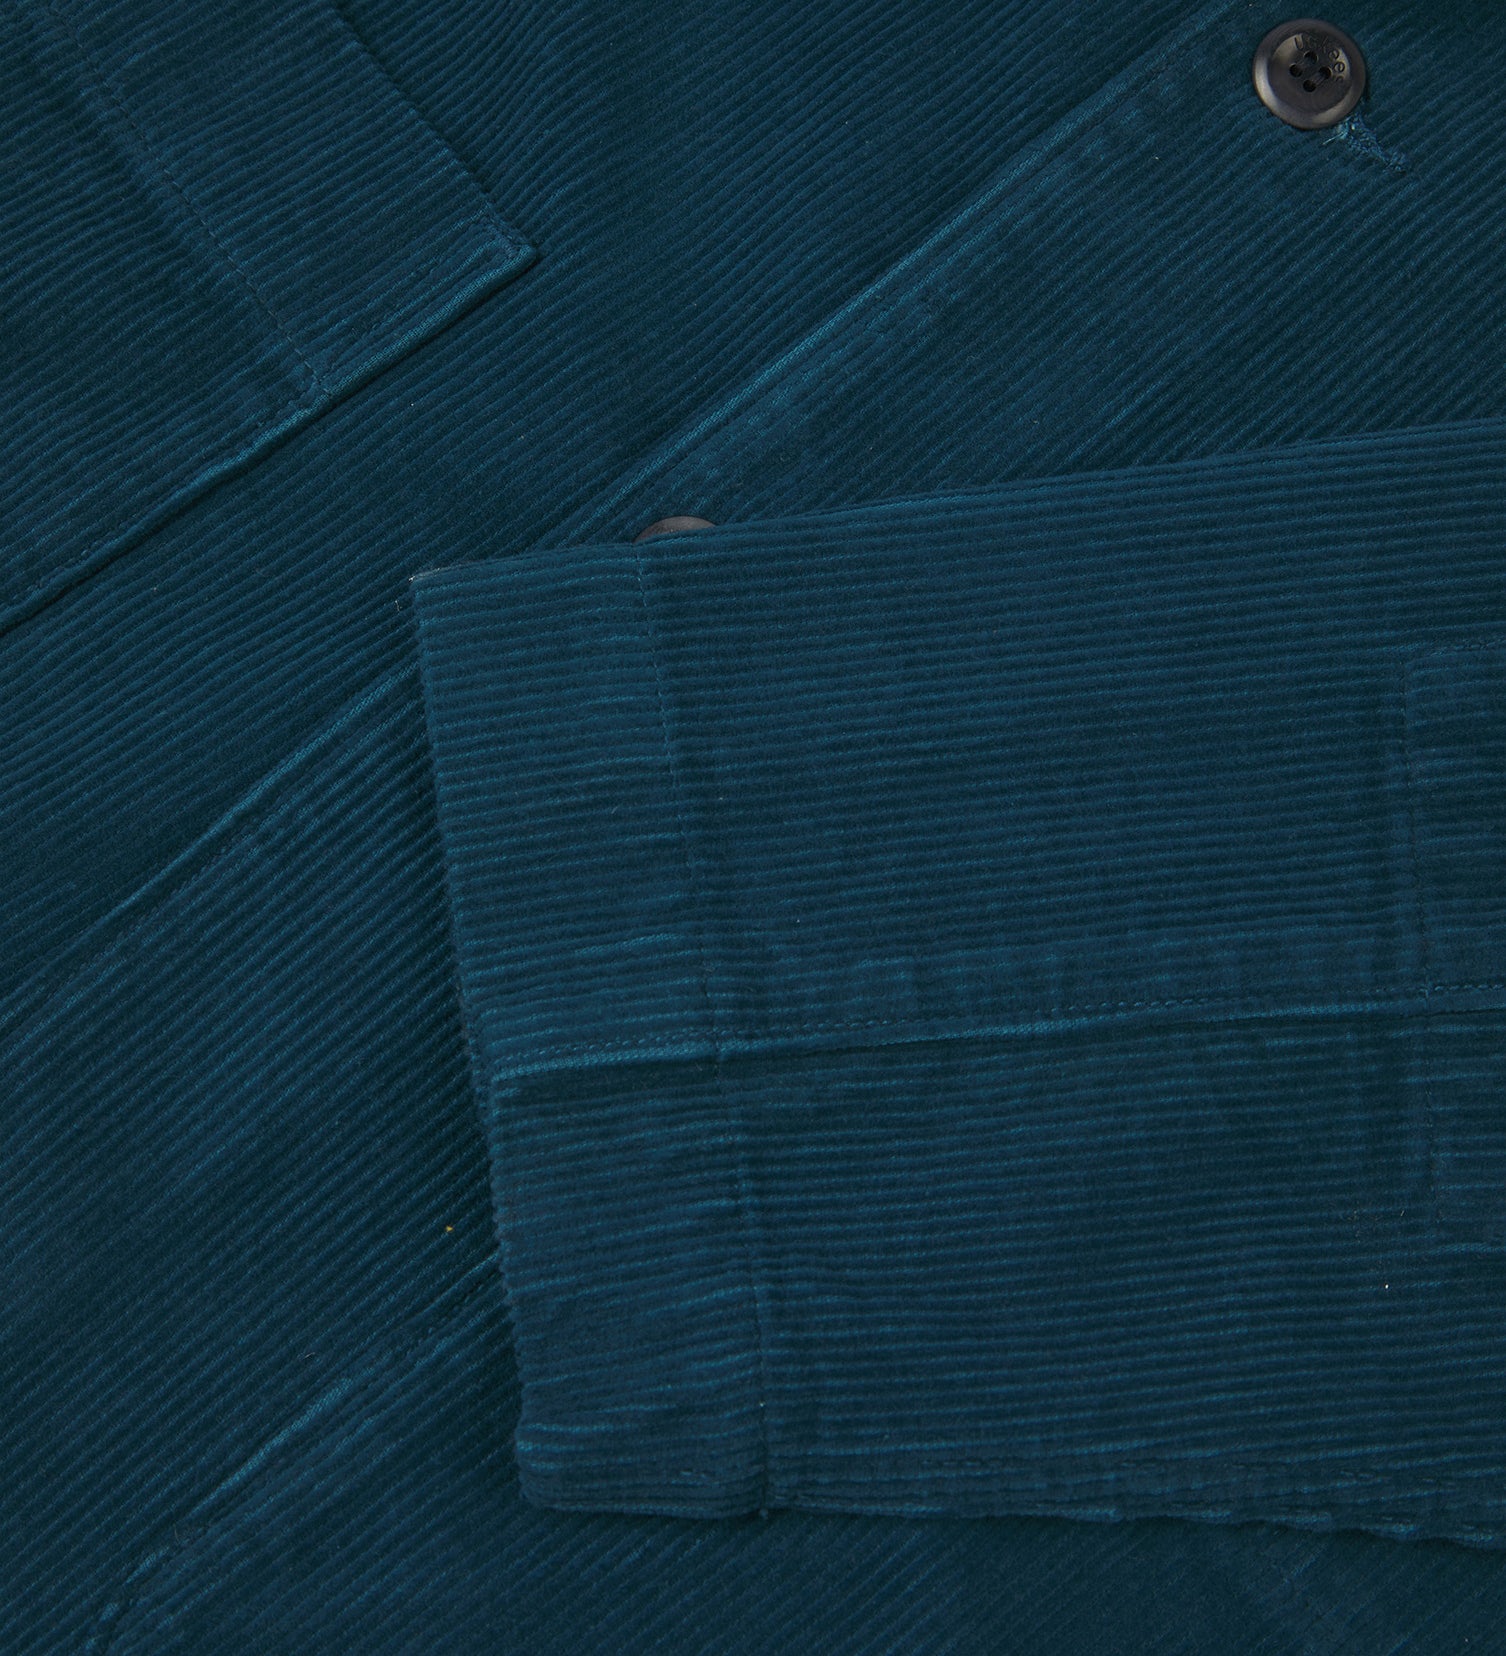  Close up view of cuff - men's corduroy petrol blue blazer from Uskees